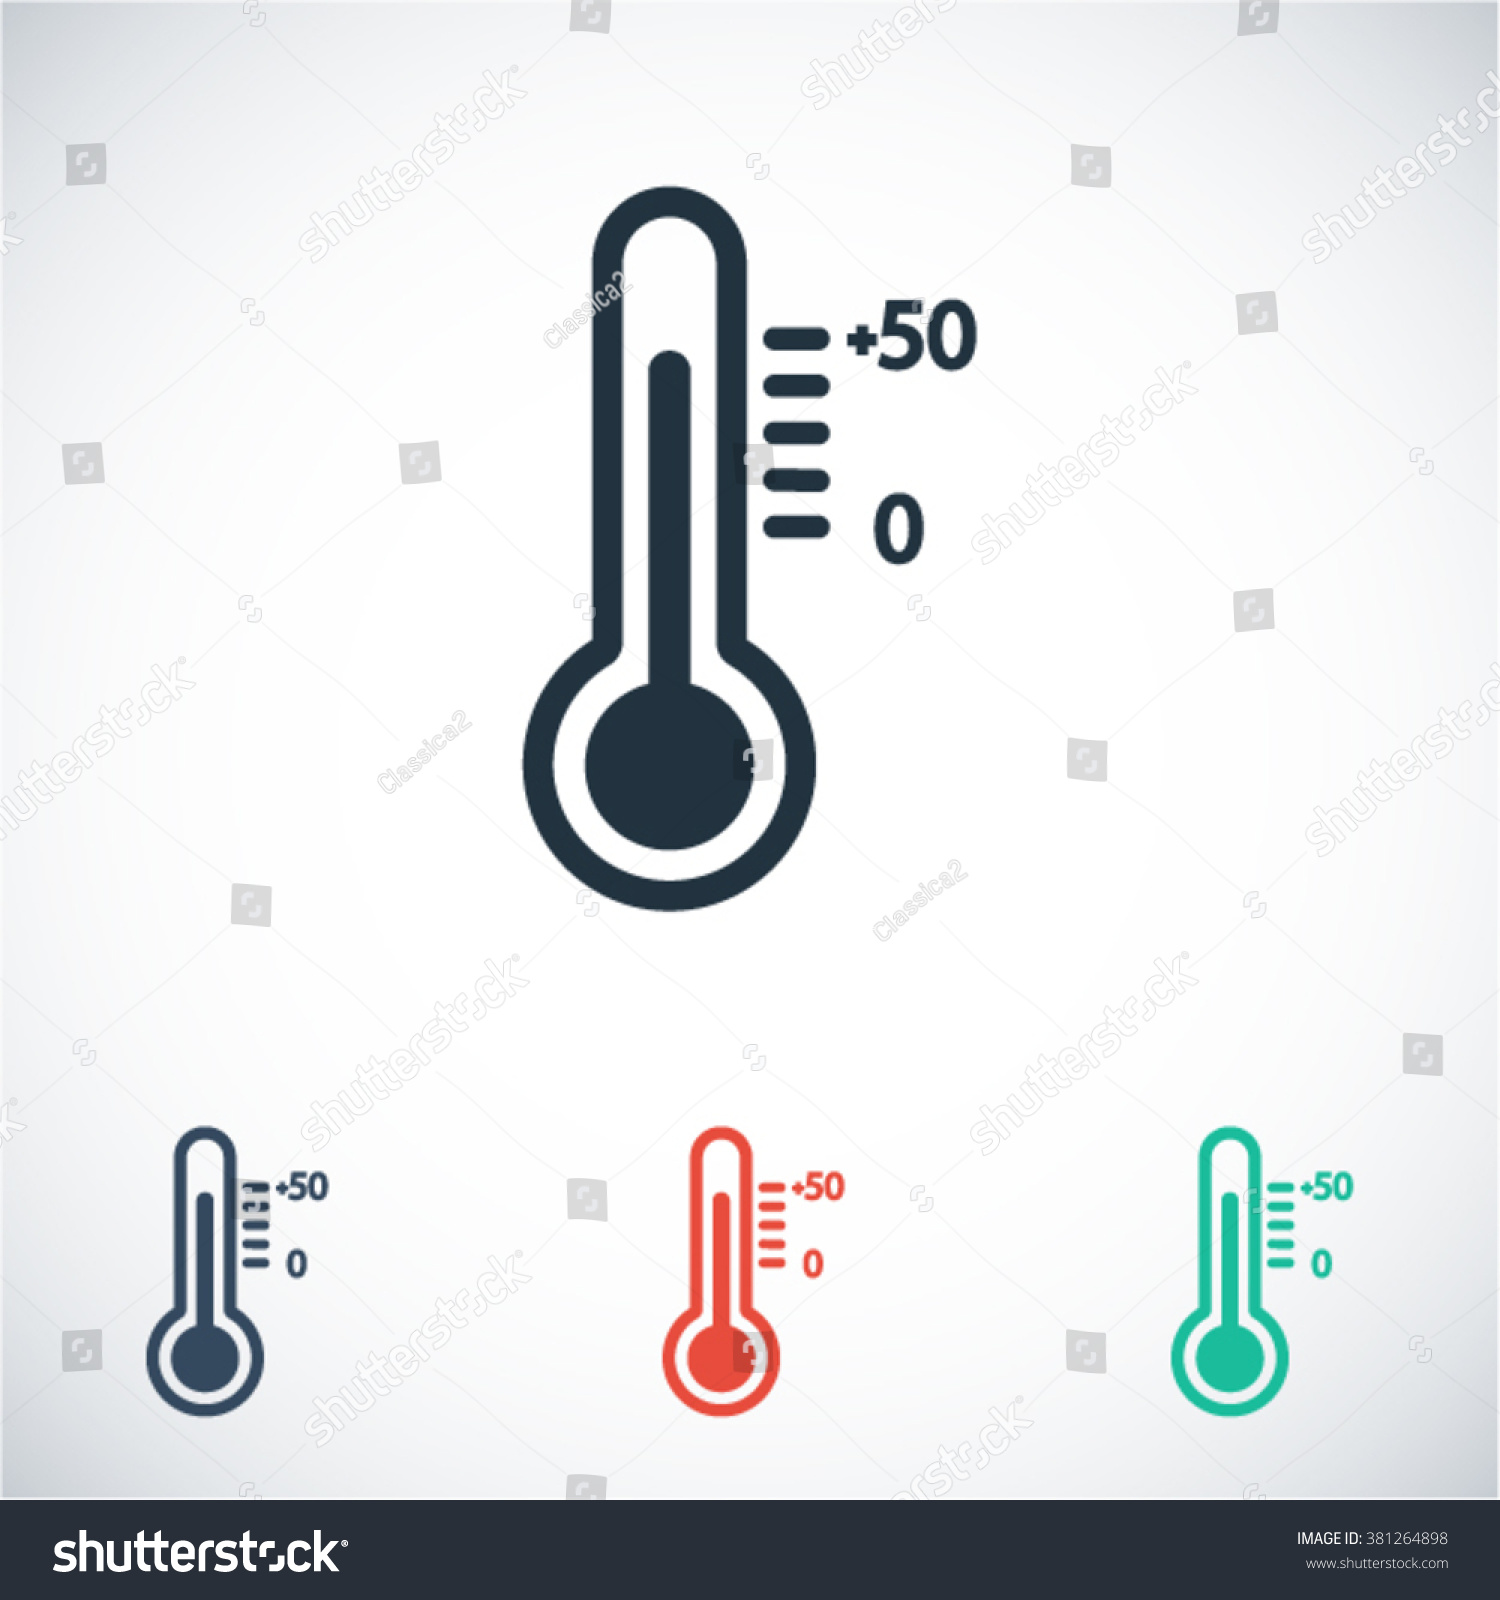 Thermometer Icon Stock Vector Illustration 381264898 : Shutterstock